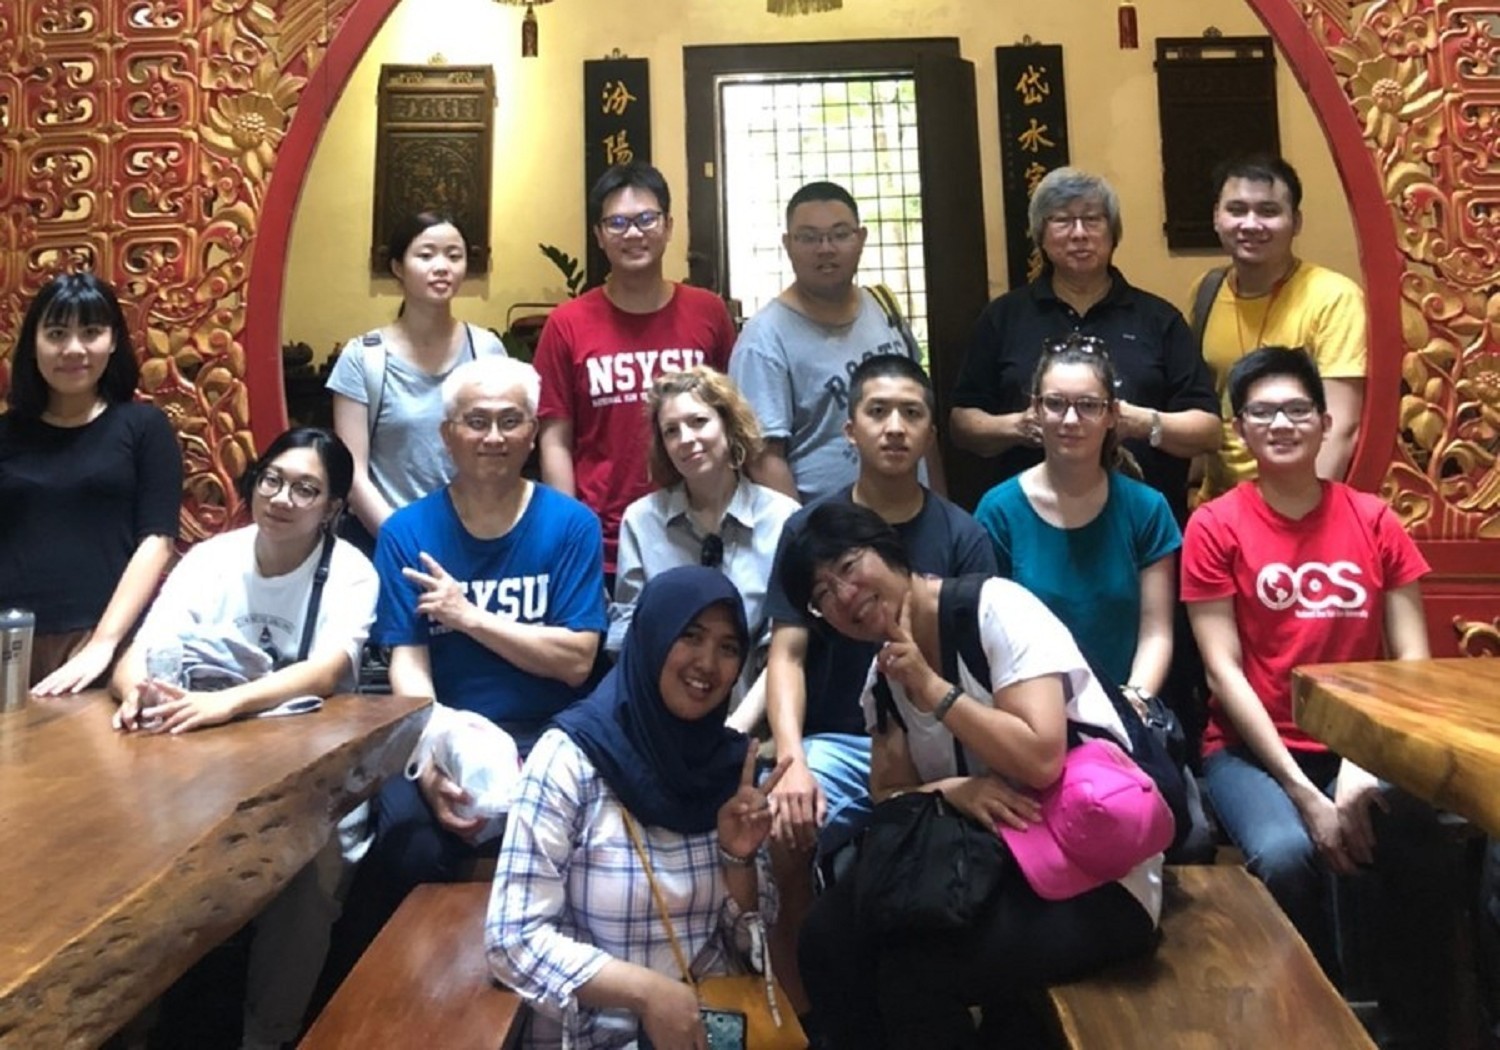 Visit to a museum in the Chinatown of Jakarta